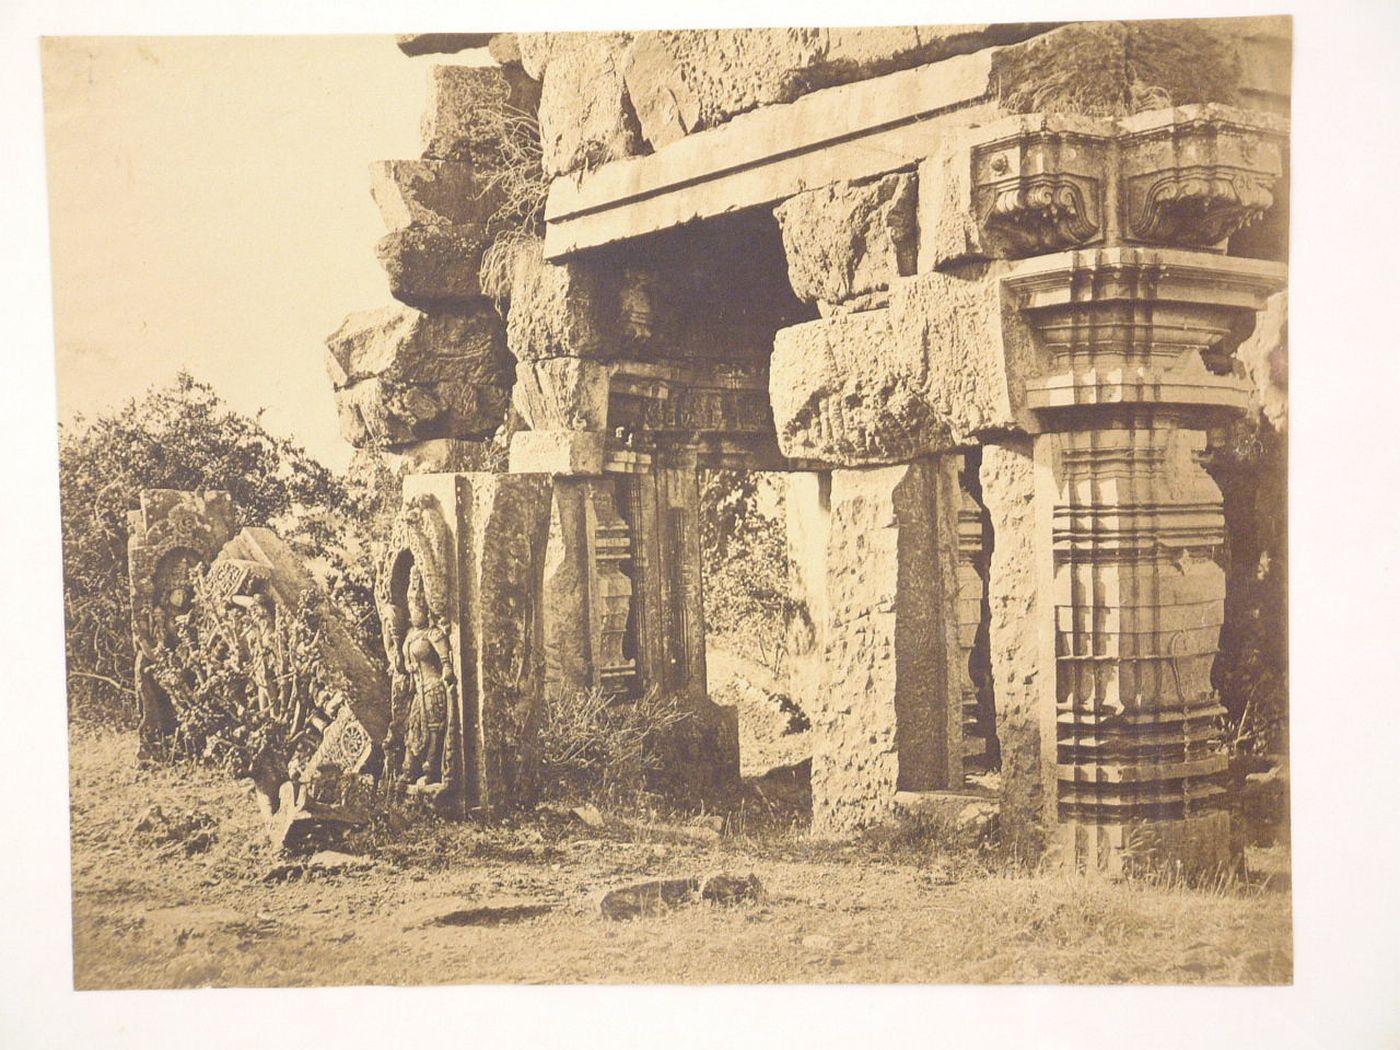 Partial view of a unidentified temple, Halebid, India